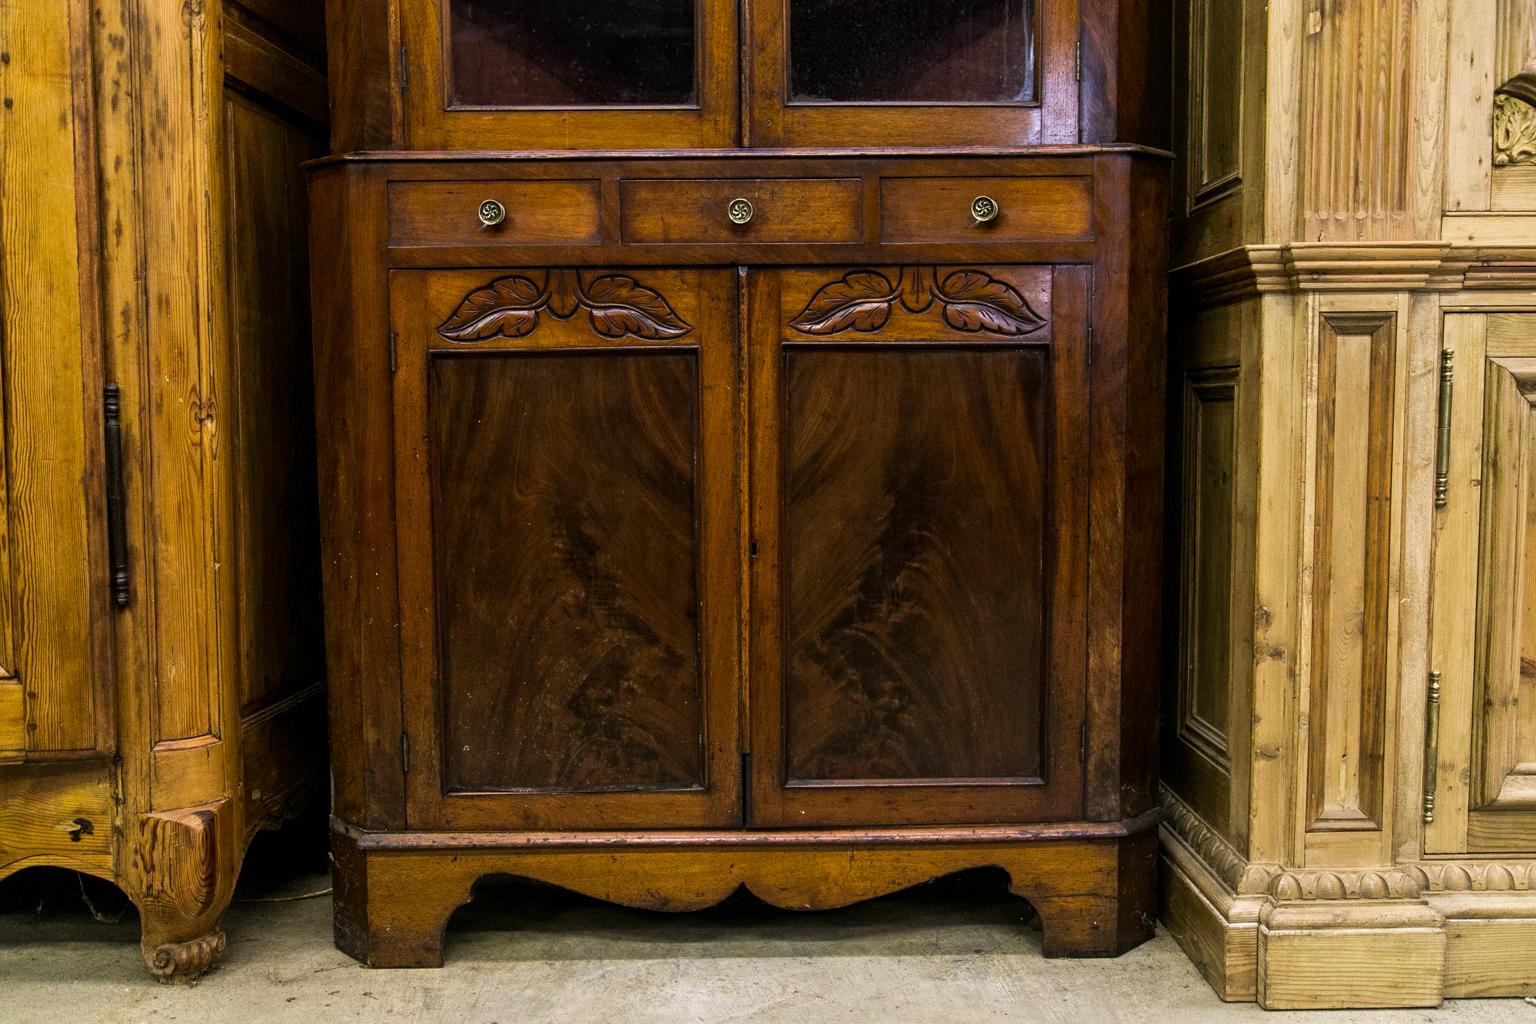 This English corner cupboard has the original wavy glass panes and the original locks. The upper and lower sections have shaped butterfly shelves. The upper section is painted red on the shelves and has red painted applied wallpaper. The upper and